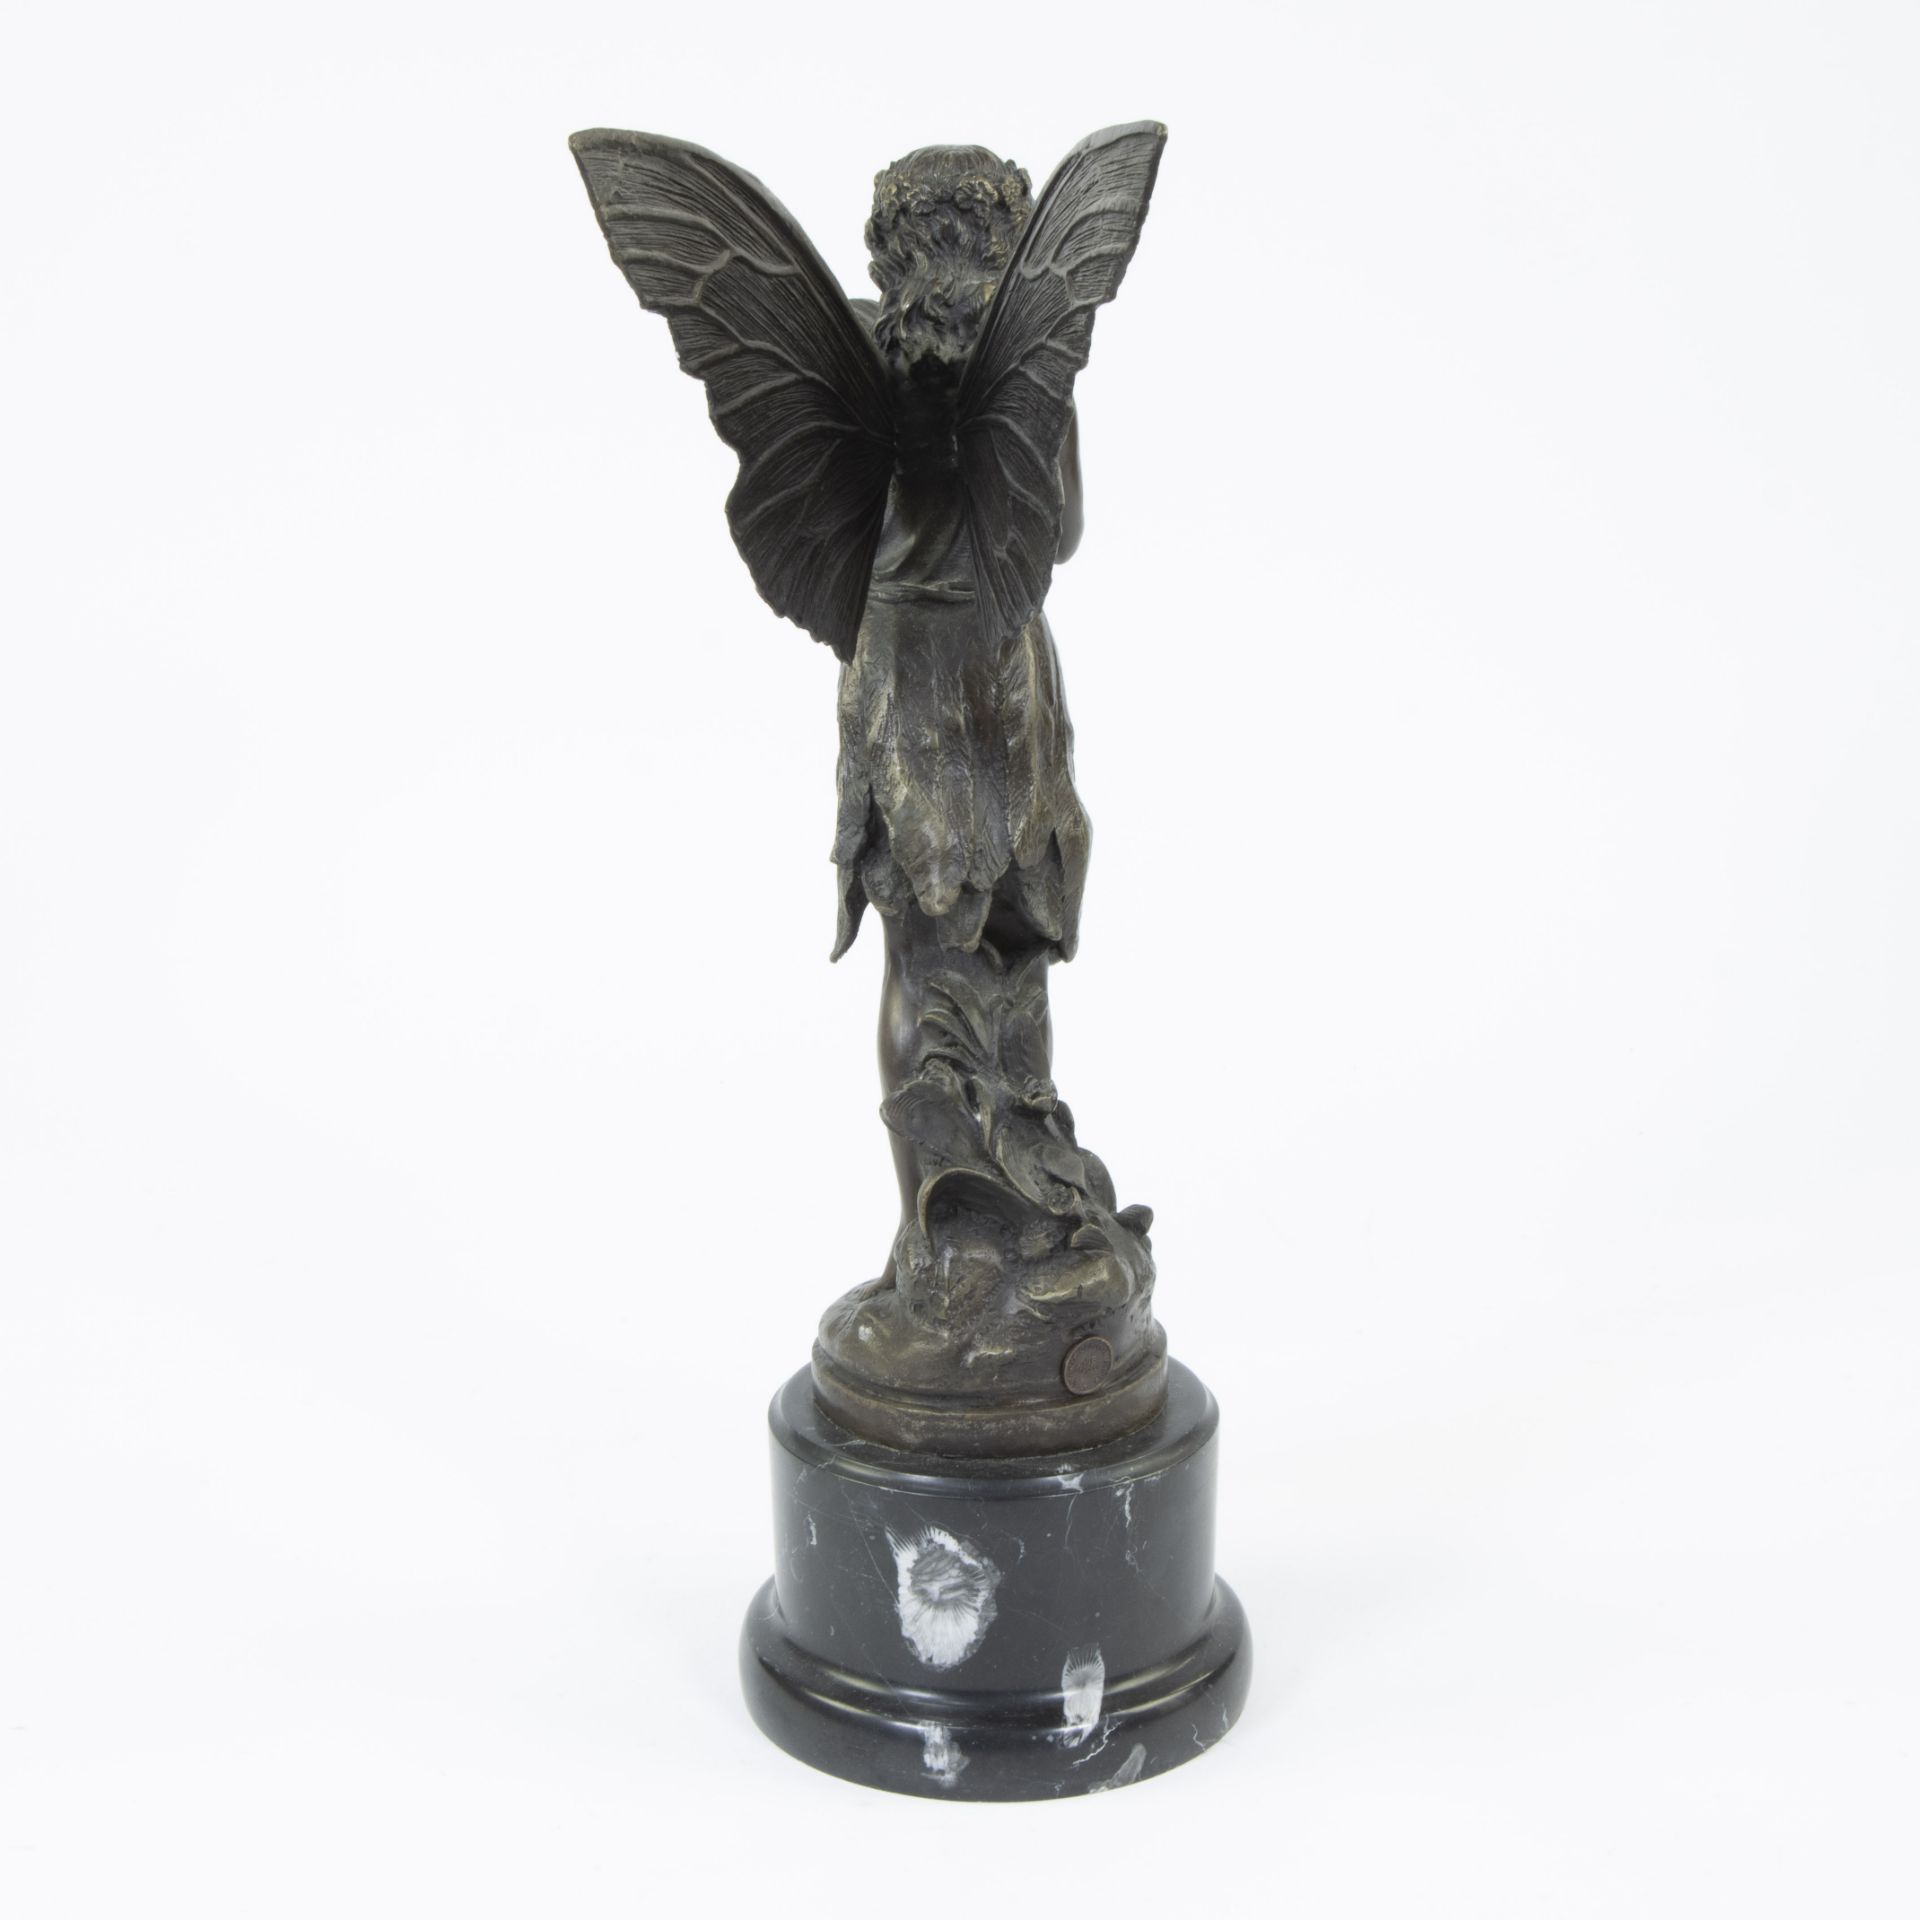 Brown patinated bronze fairy statue on black marble base sculpted in Art Nouveau style, Milo, posthu - Image 3 of 5